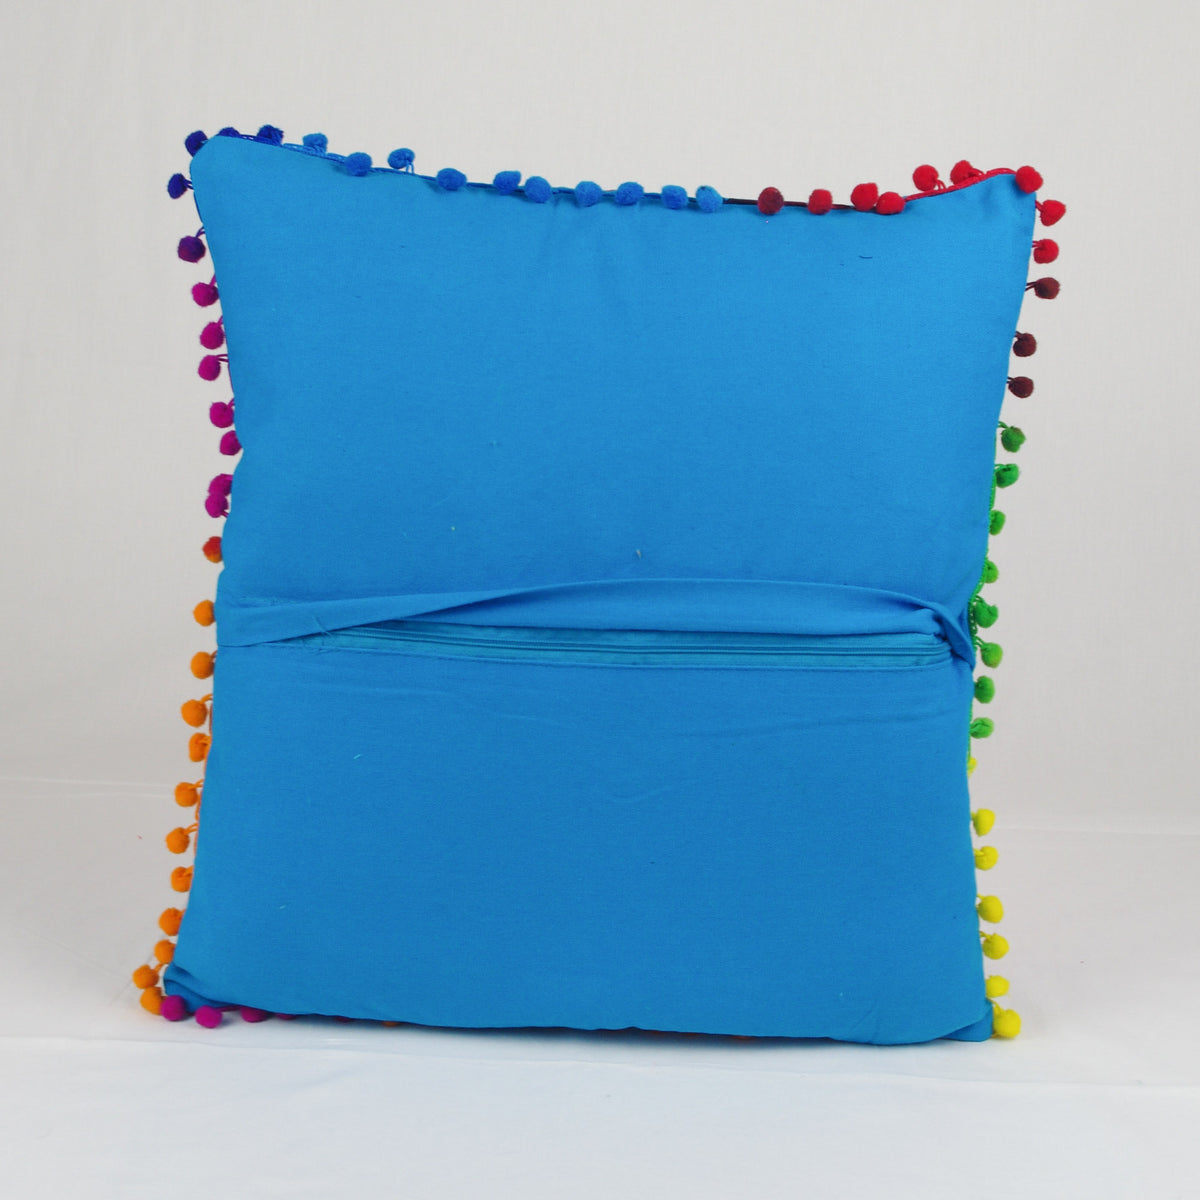 Suzani Woolen Embroidered Cotton Square Cushion Cover - Blue